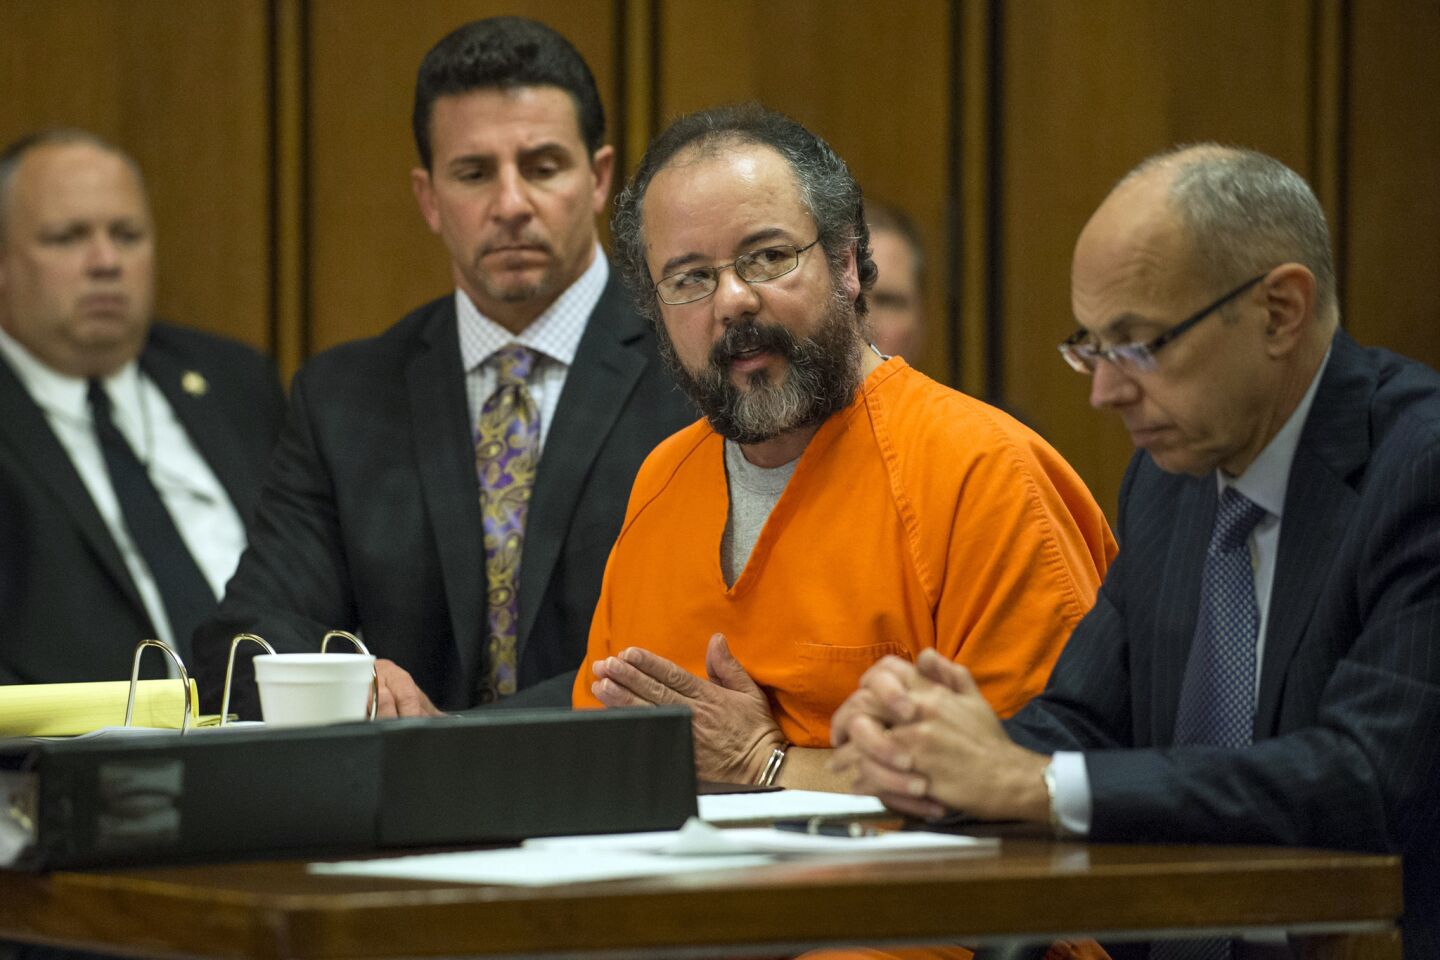 At his sentencing on Aug. 1, Ariel Castro told Judge Michael J. Russo, "I'm not a monster, I'm sick.... I'm a happy person inside." Castro was found hanged in his prison cell a few weeks into a life sentence without parole.